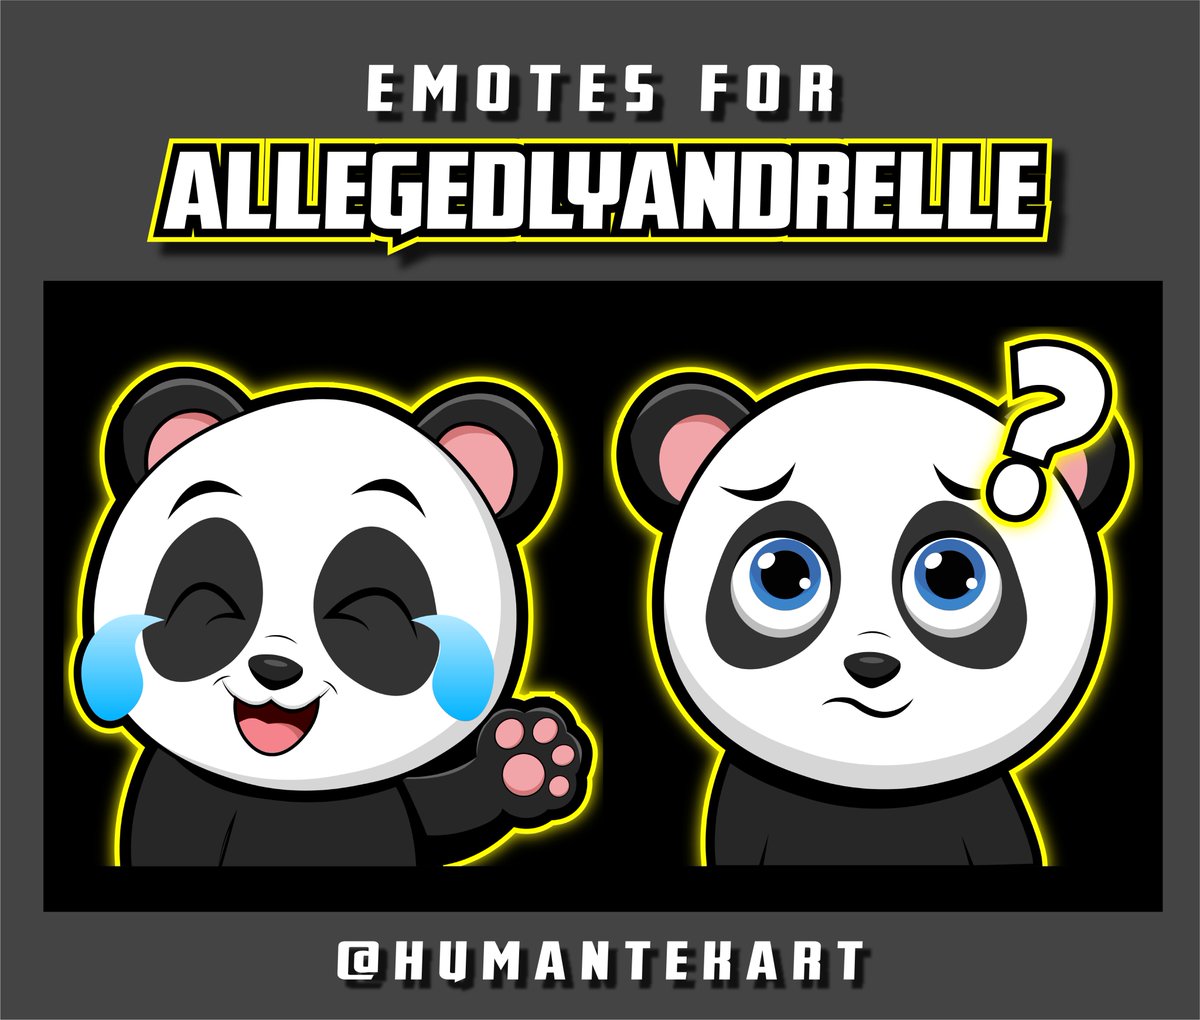 Customized emotes 🔥🤩
#emotes #twitch #twitchemotes #twitchaffiliate #emote #twitchstreamer #twitchemote #twitchemoteartist #streamer #emotestwitch #digitalart #art #gaming #overlays #twitchsubbadges #emoteartist #drawing #artistsoninstagram #graphicdesign #logo #TwitchStreamers